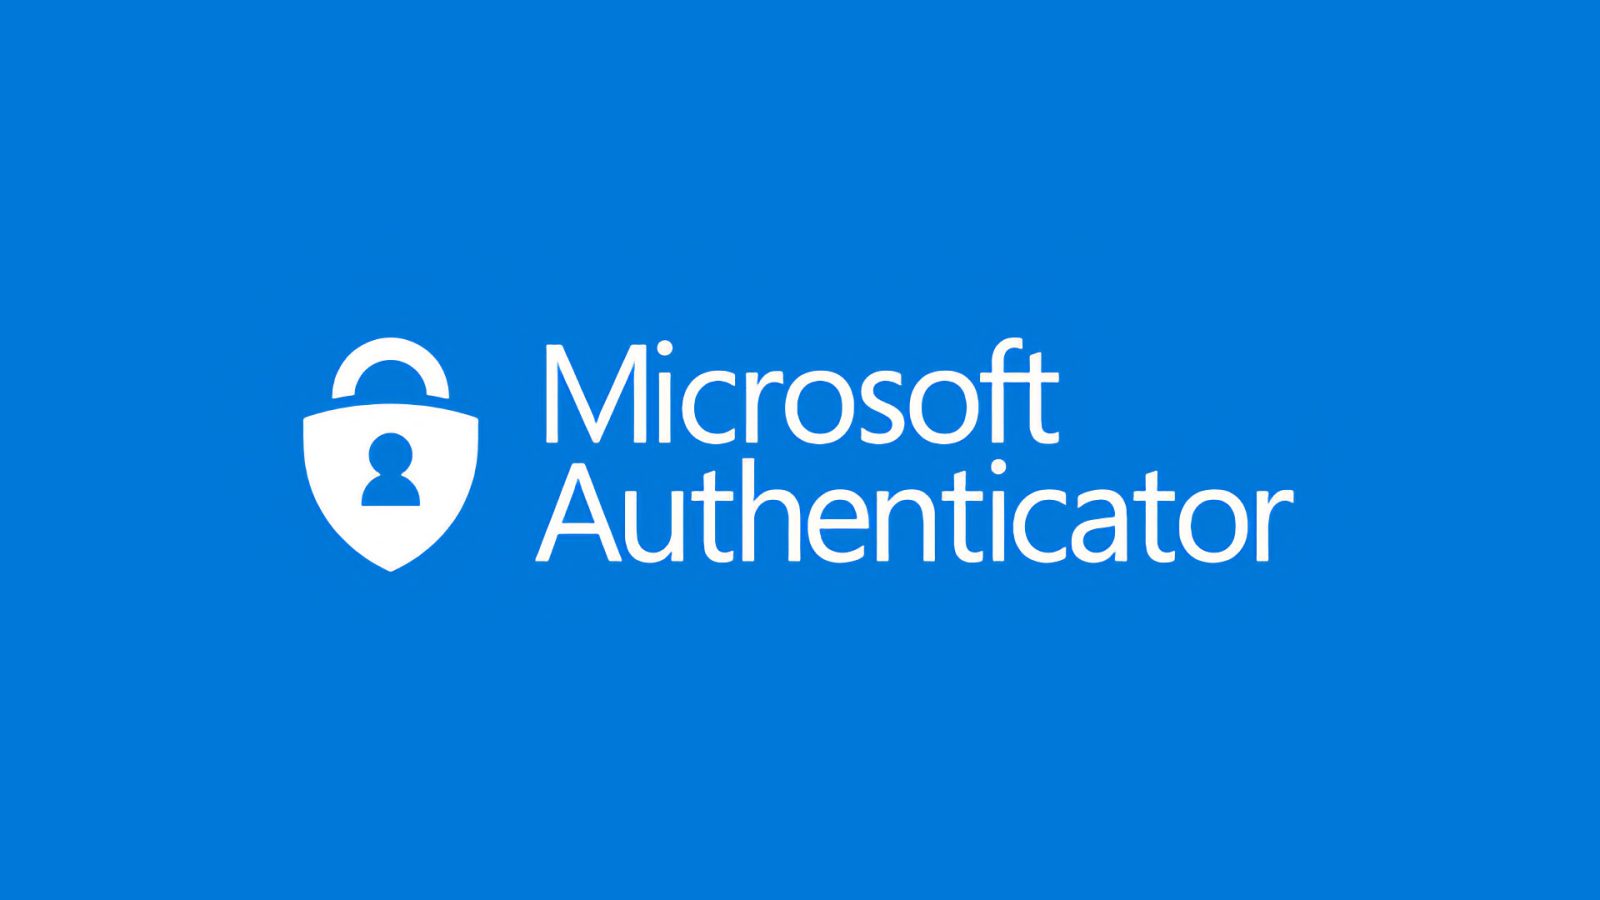 Microsoft Authenticator app for Apple Watch to be discontinued next month